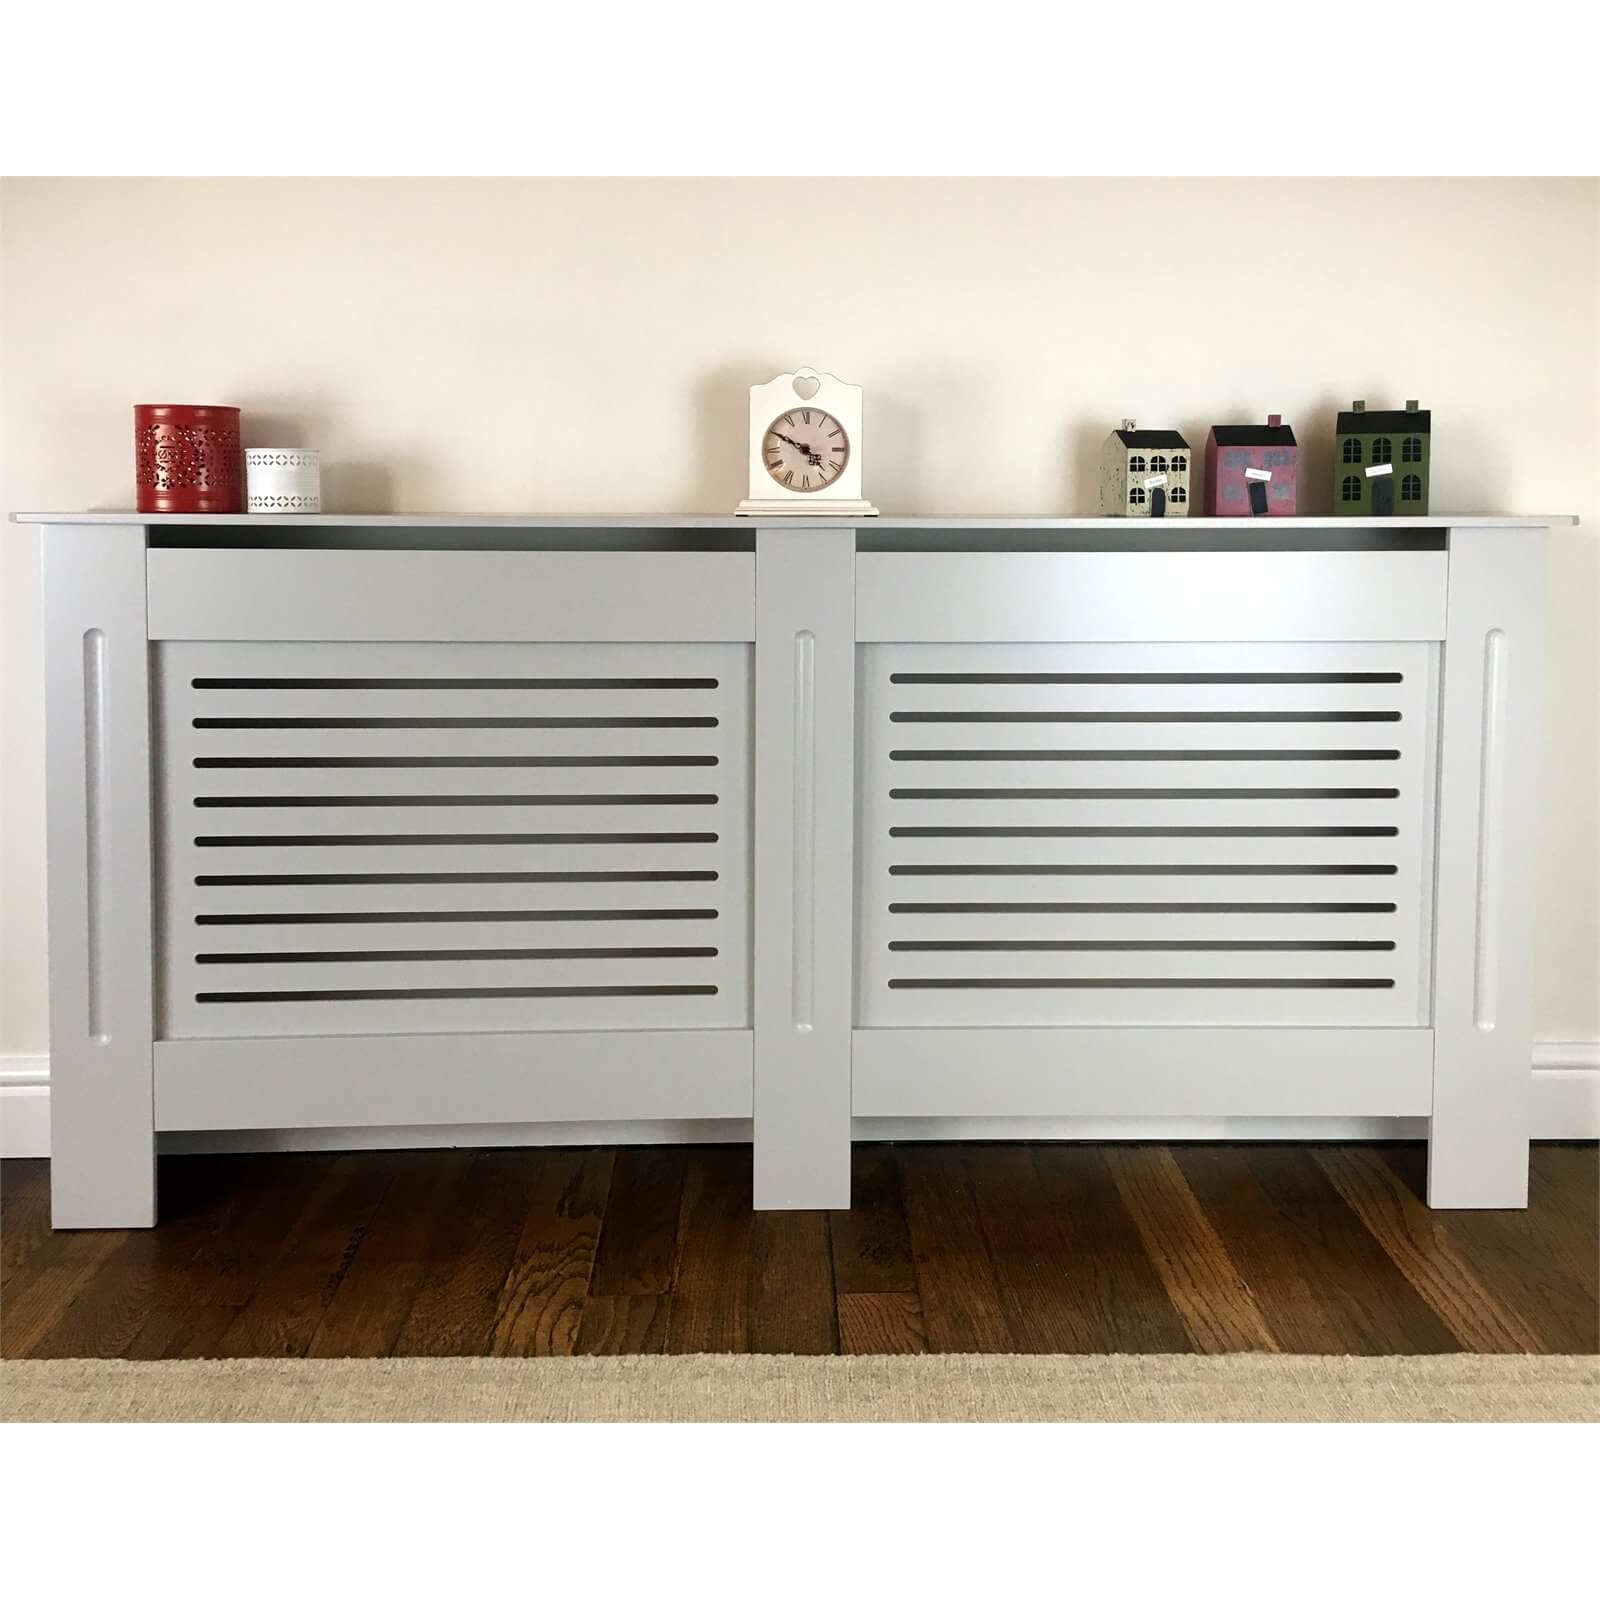 Radiator Cover with Horizontal Slatted Design in Grey - Extra Large